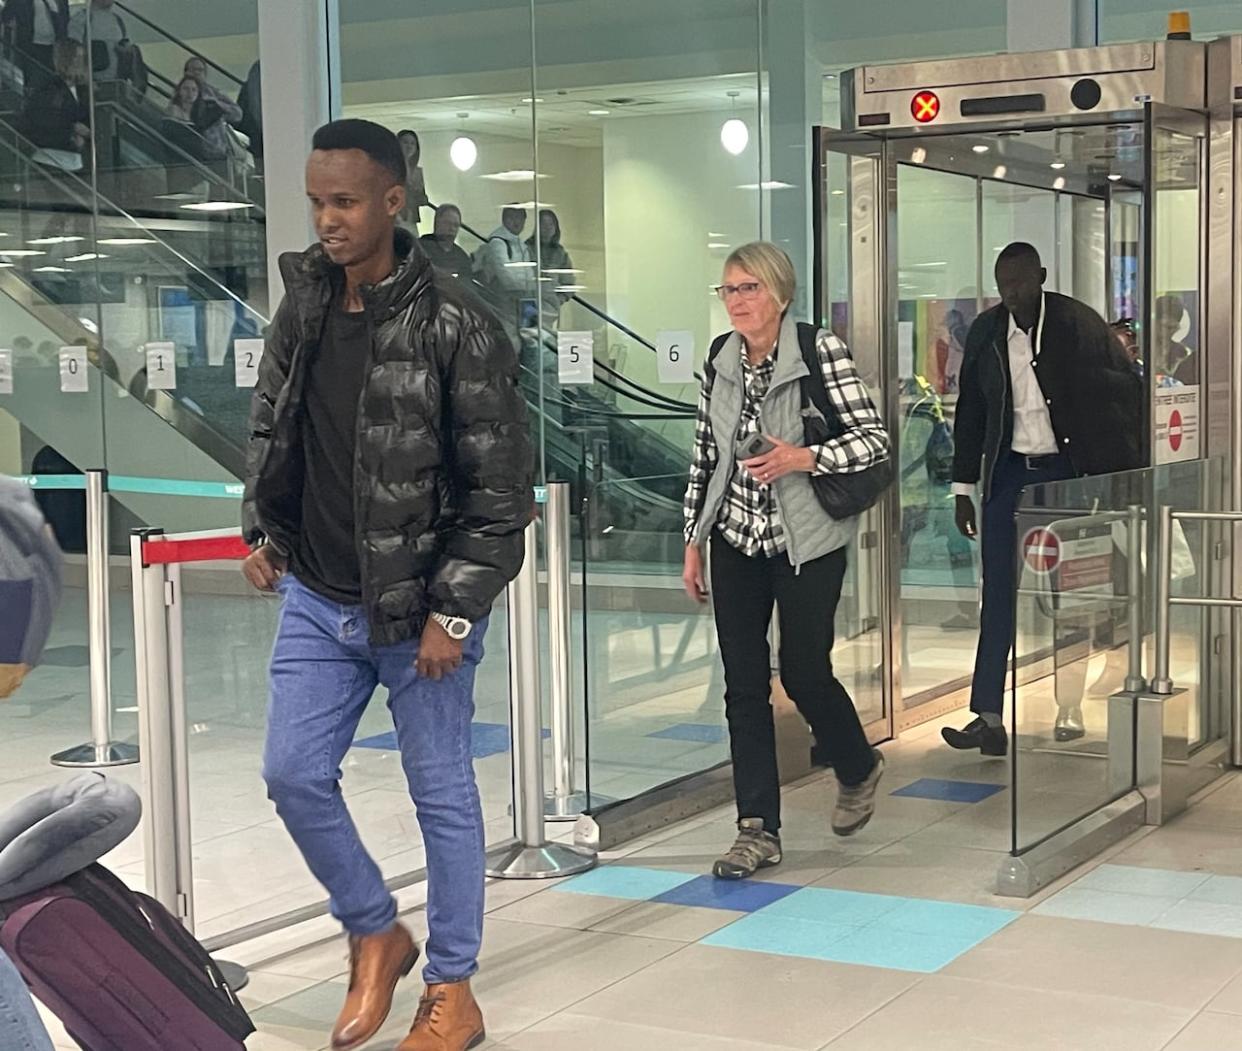 Abdifatah Sabriye, a refugee for nearly 15 years, arrived at Halifax Stanfield International Airport Friday night, now a permanent resident of Canada. (Kayla Hounsell/CBC - image credit)